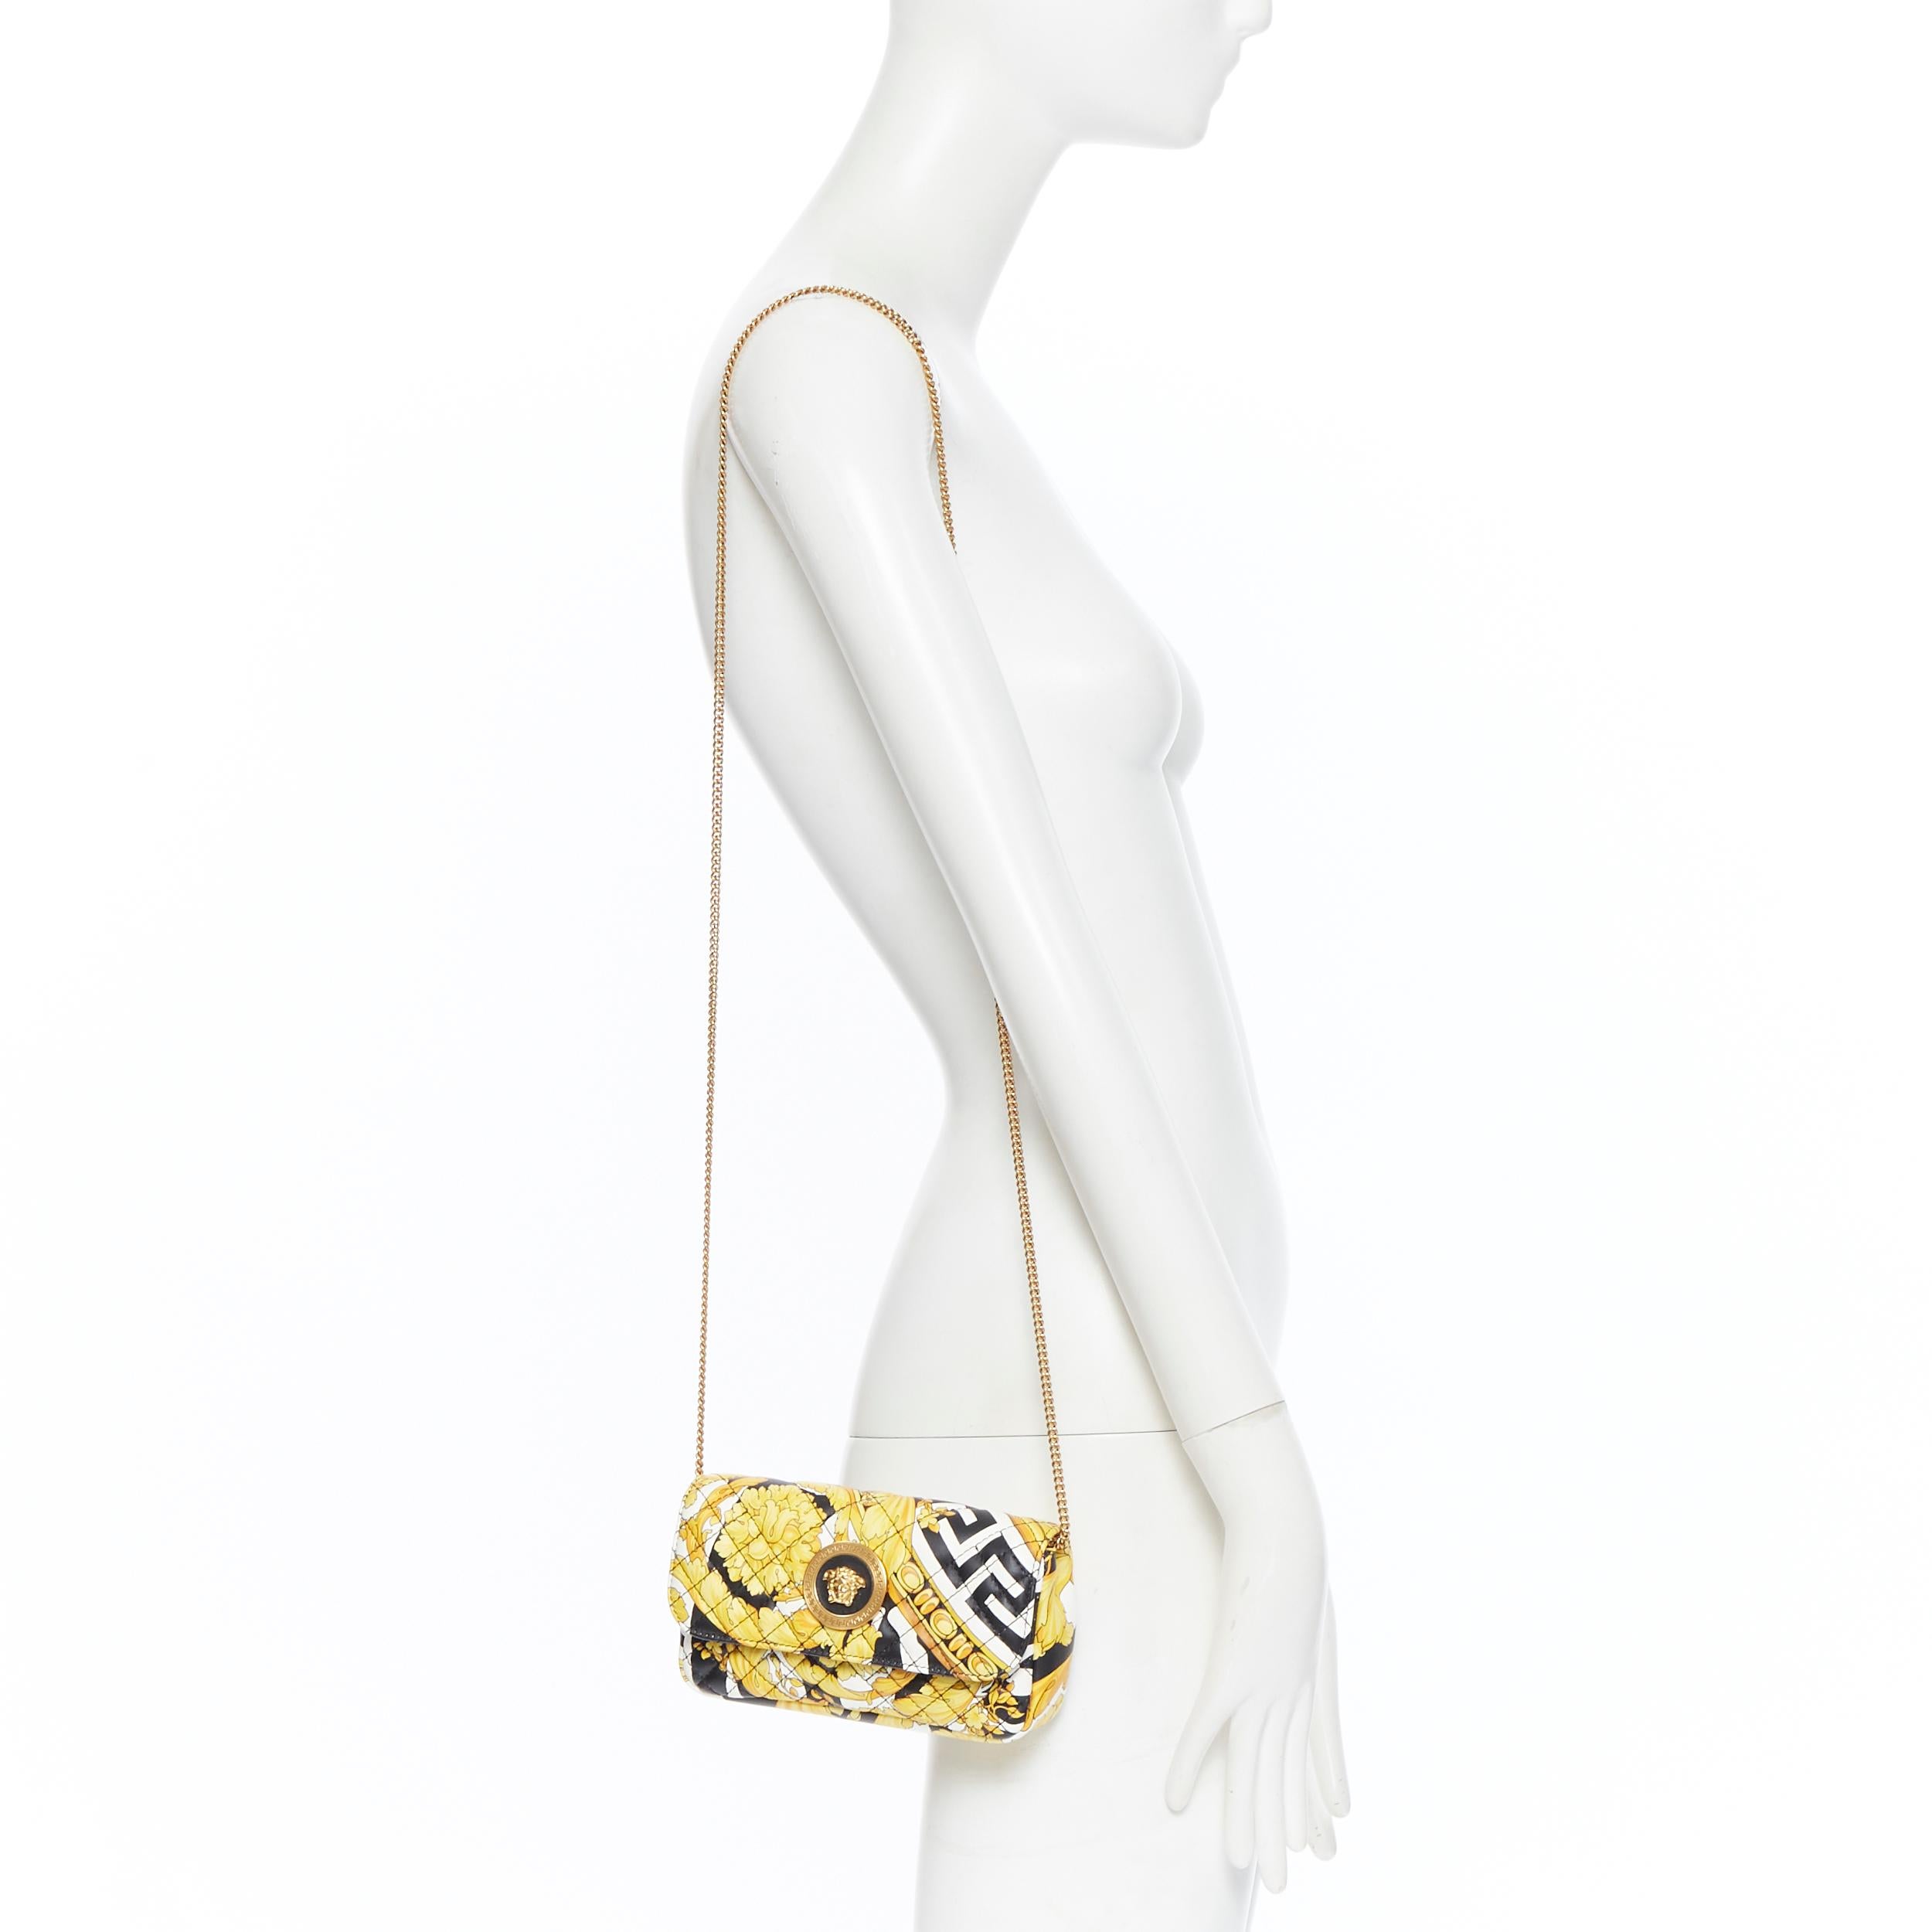 new VERSACE AW19 black white Greca gold baroque print quilted leather Medusa bag
Brand: Versace
Designer: Donatella Versace
Collection: Fall Winter 2019
Model Name / Style: Shoulder bag
Material: Leather
Color: Multicolour
Pattern: Abstract
Closure: